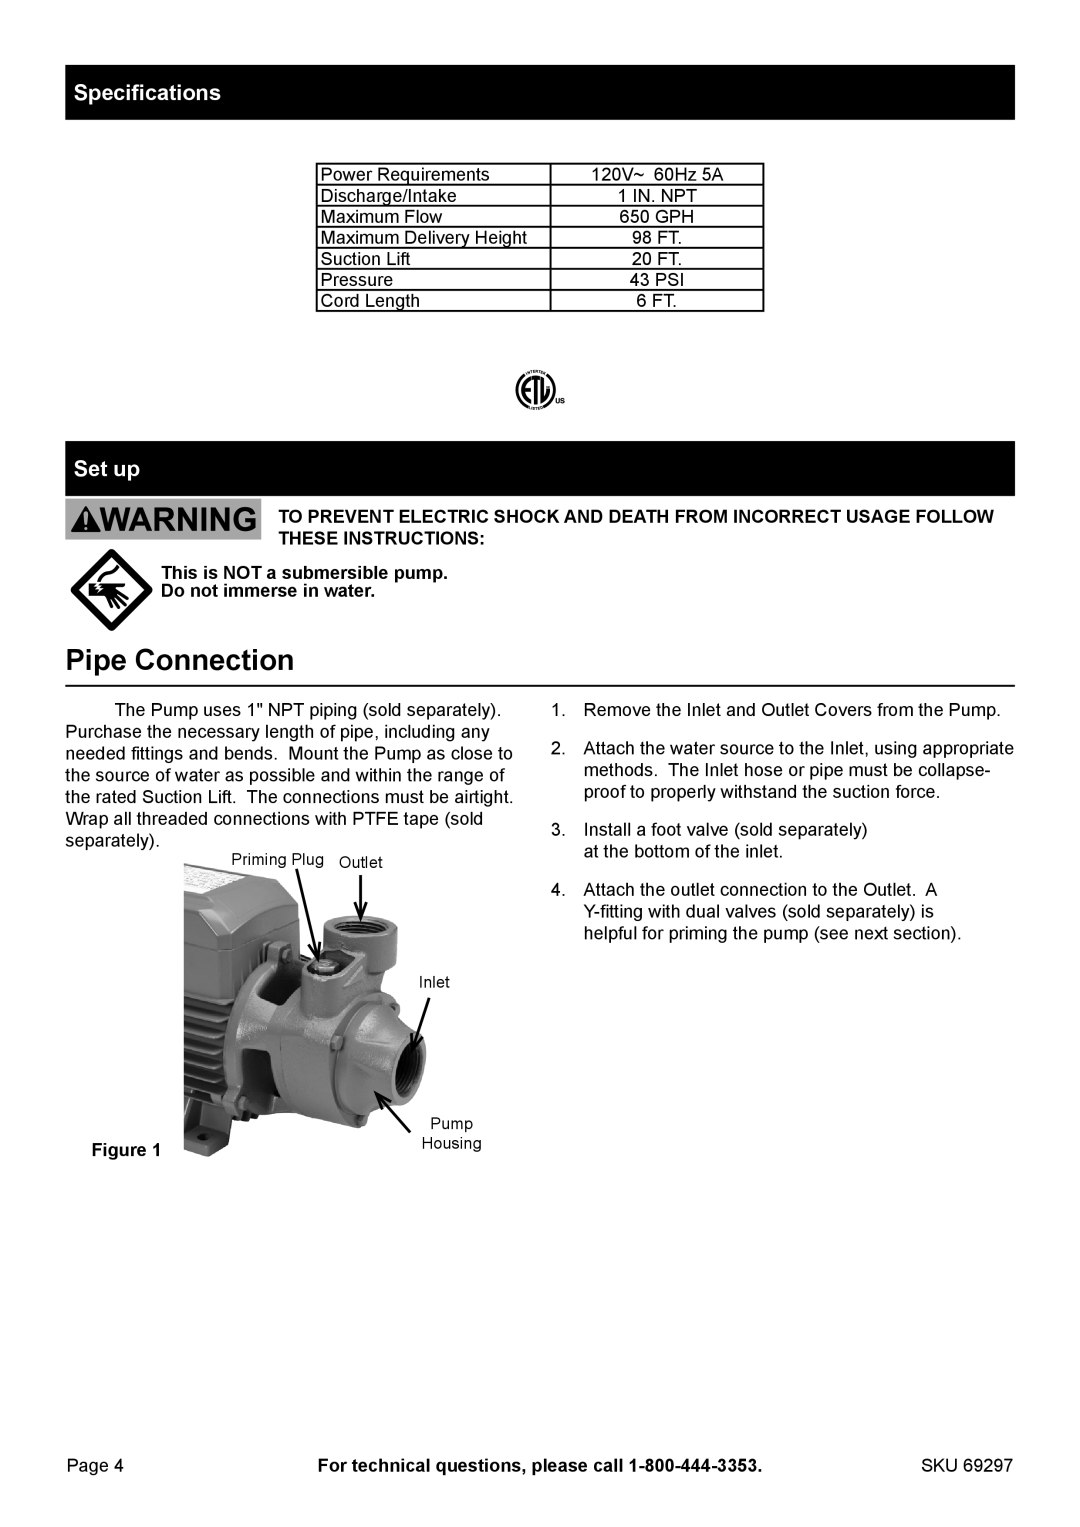 Harbor Freight Tools 69297 owner manual Pipe Connection, Specifications, Set up, For technical questions, please call 